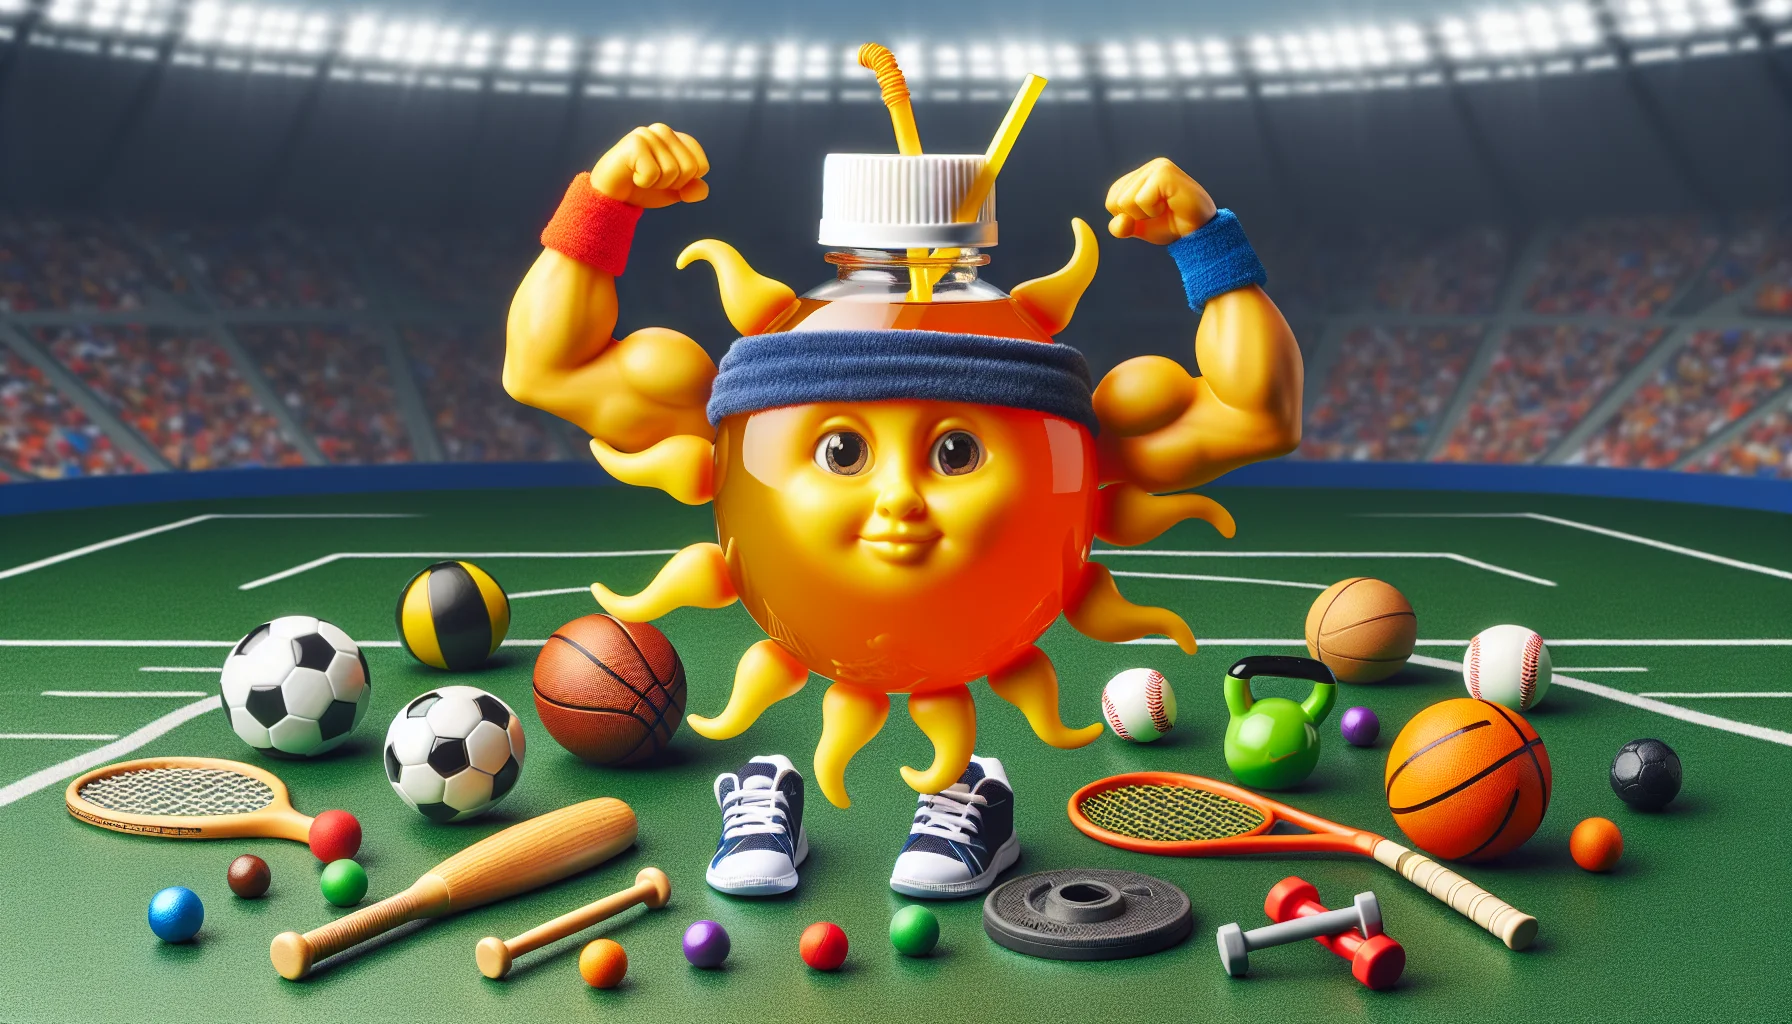 Generate a colorful and detailed image of a sun-shaped bottle filled with liquid Vitamin D. The sun is wearing a witty small bandana, showing off mock muscular arms with athletic bands around them. The bottle is surrounded by tiny cartoonish sporting equipment like soccer balls, baseball bats, tennis rackets, and gym weights. All this is set on a background of a professional football field, adding a surreal and energetic atmosphere. The action and humor of the scene makes the concept of using supplements for sports enticing and fun.